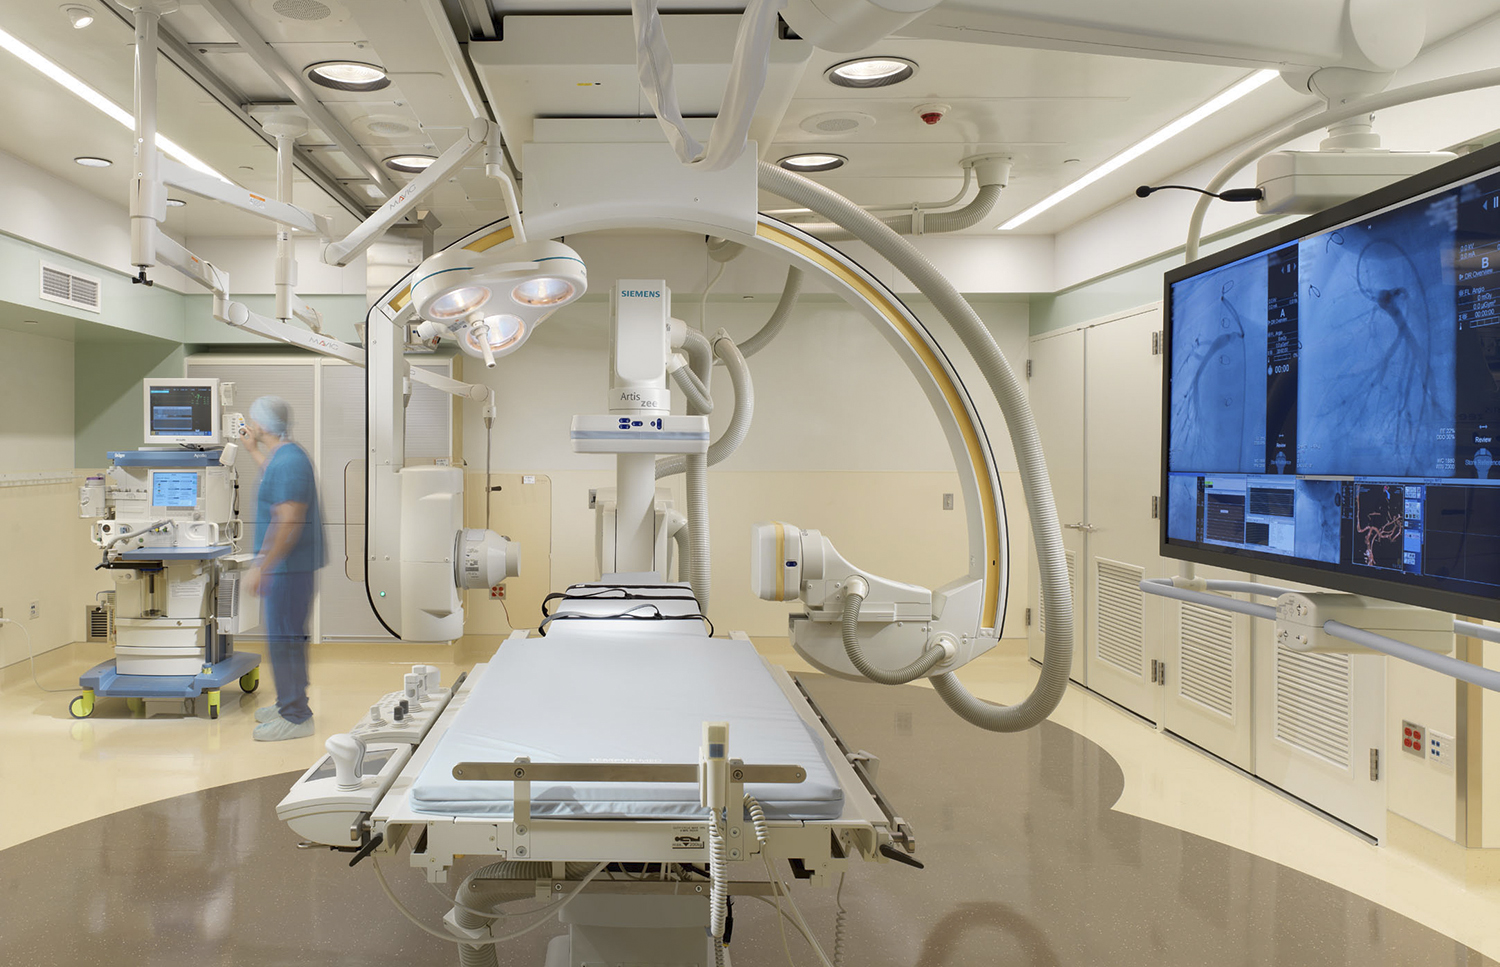 OSHPD approvals were secured for each of the three Cath Labs in only 2 months and 30% faster than Stanford’s typical Cath Lab Projects.